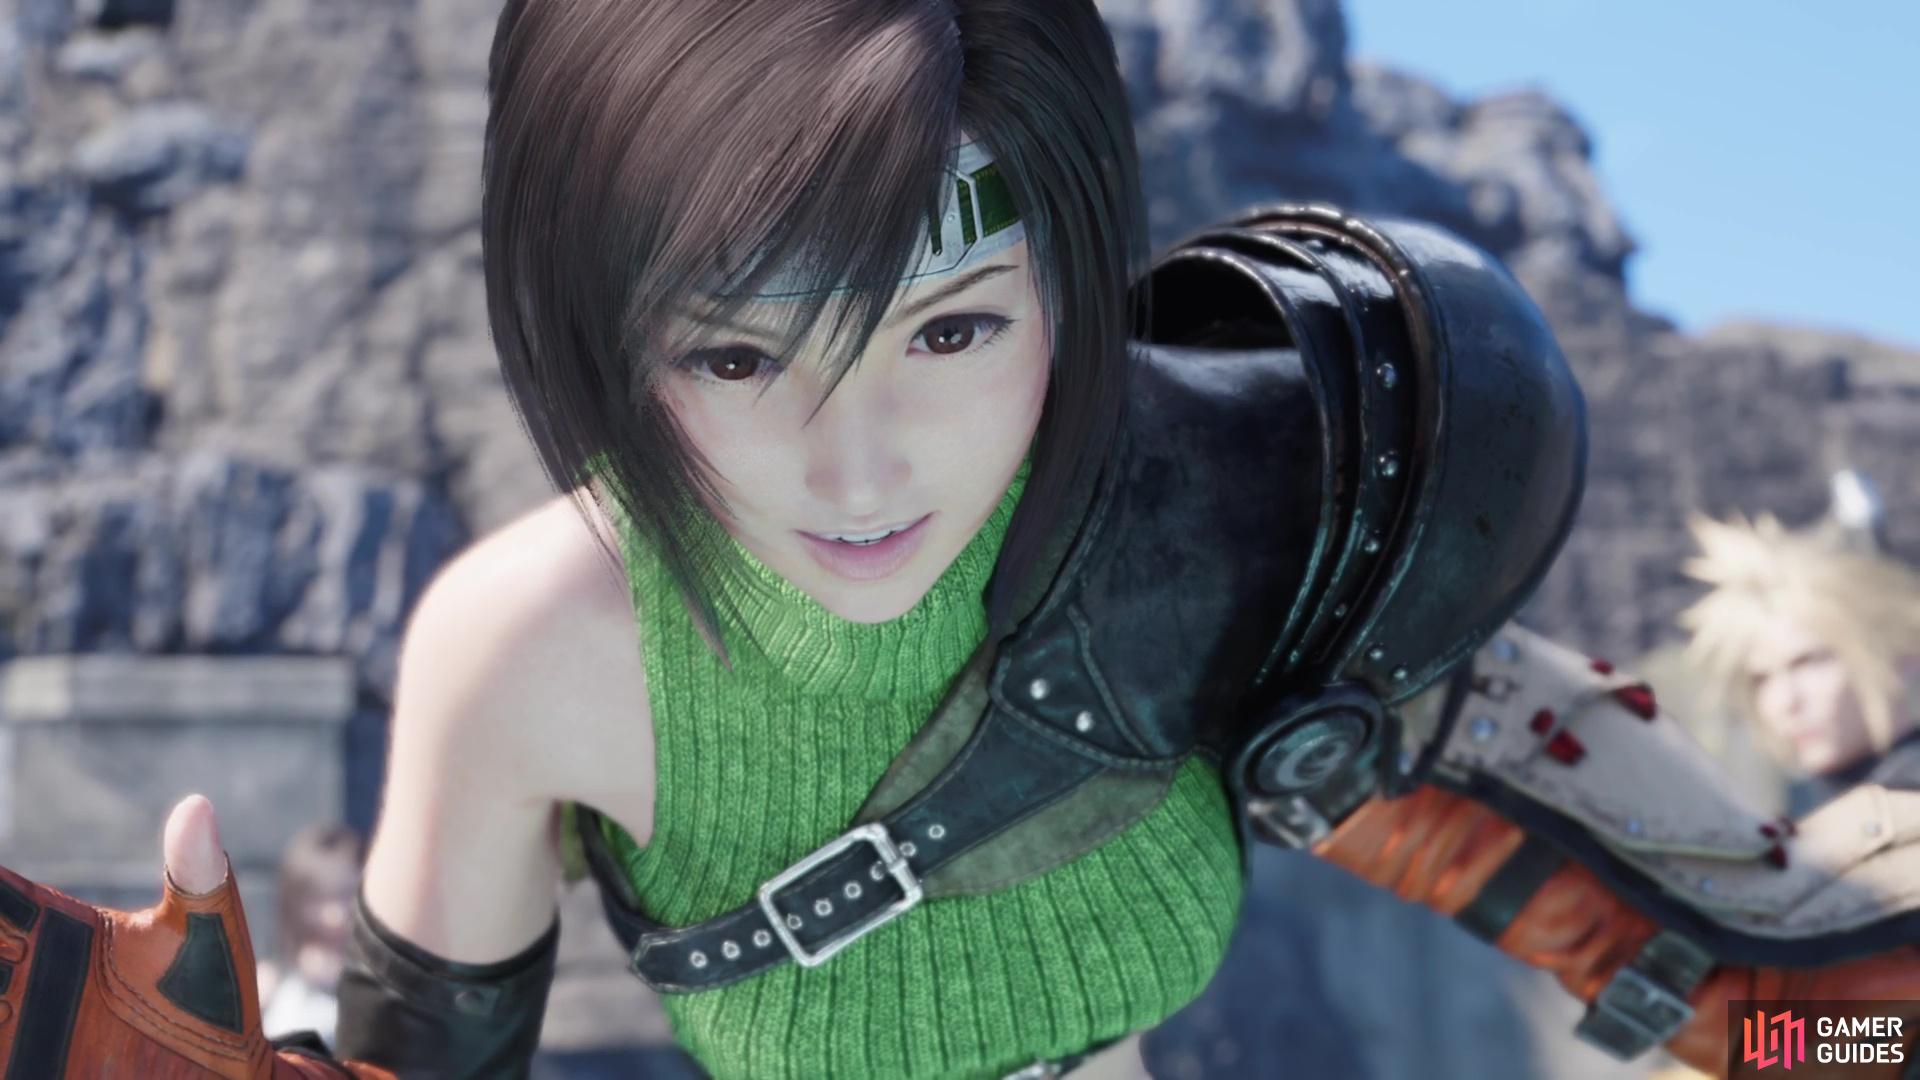 The Corel Coal Mines will have you controlling Yuffie while exploring!